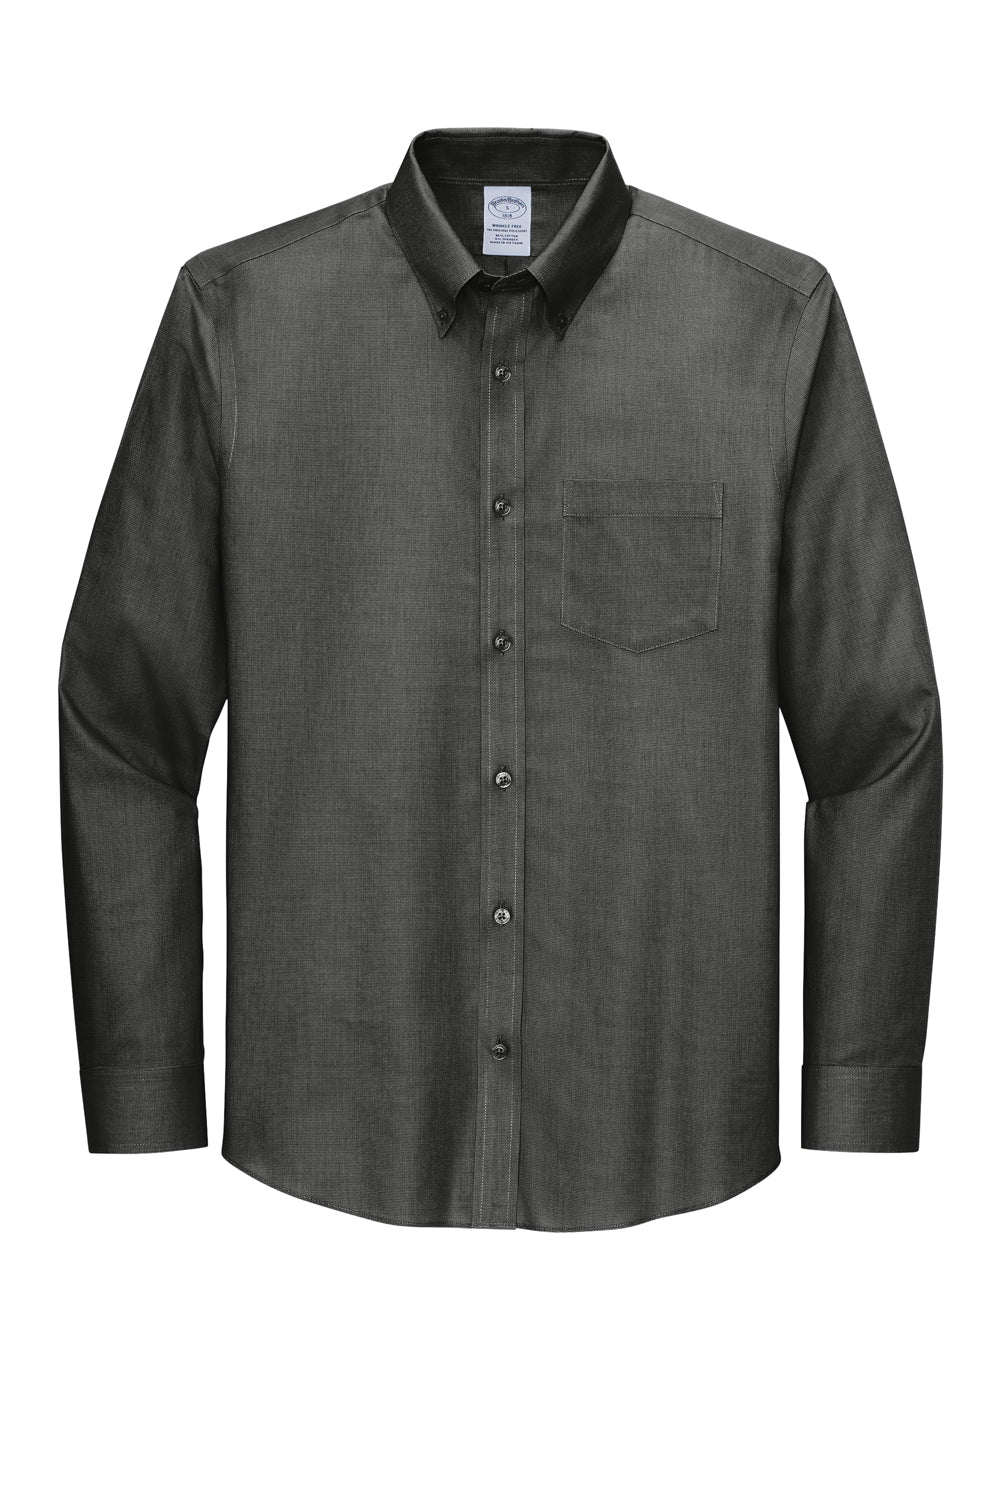 Brooks Brothers Mens Wrinkle Resistant Nailhead Long Sleeve Button Down Shirt w/ Pocket Deep Black Flat Front